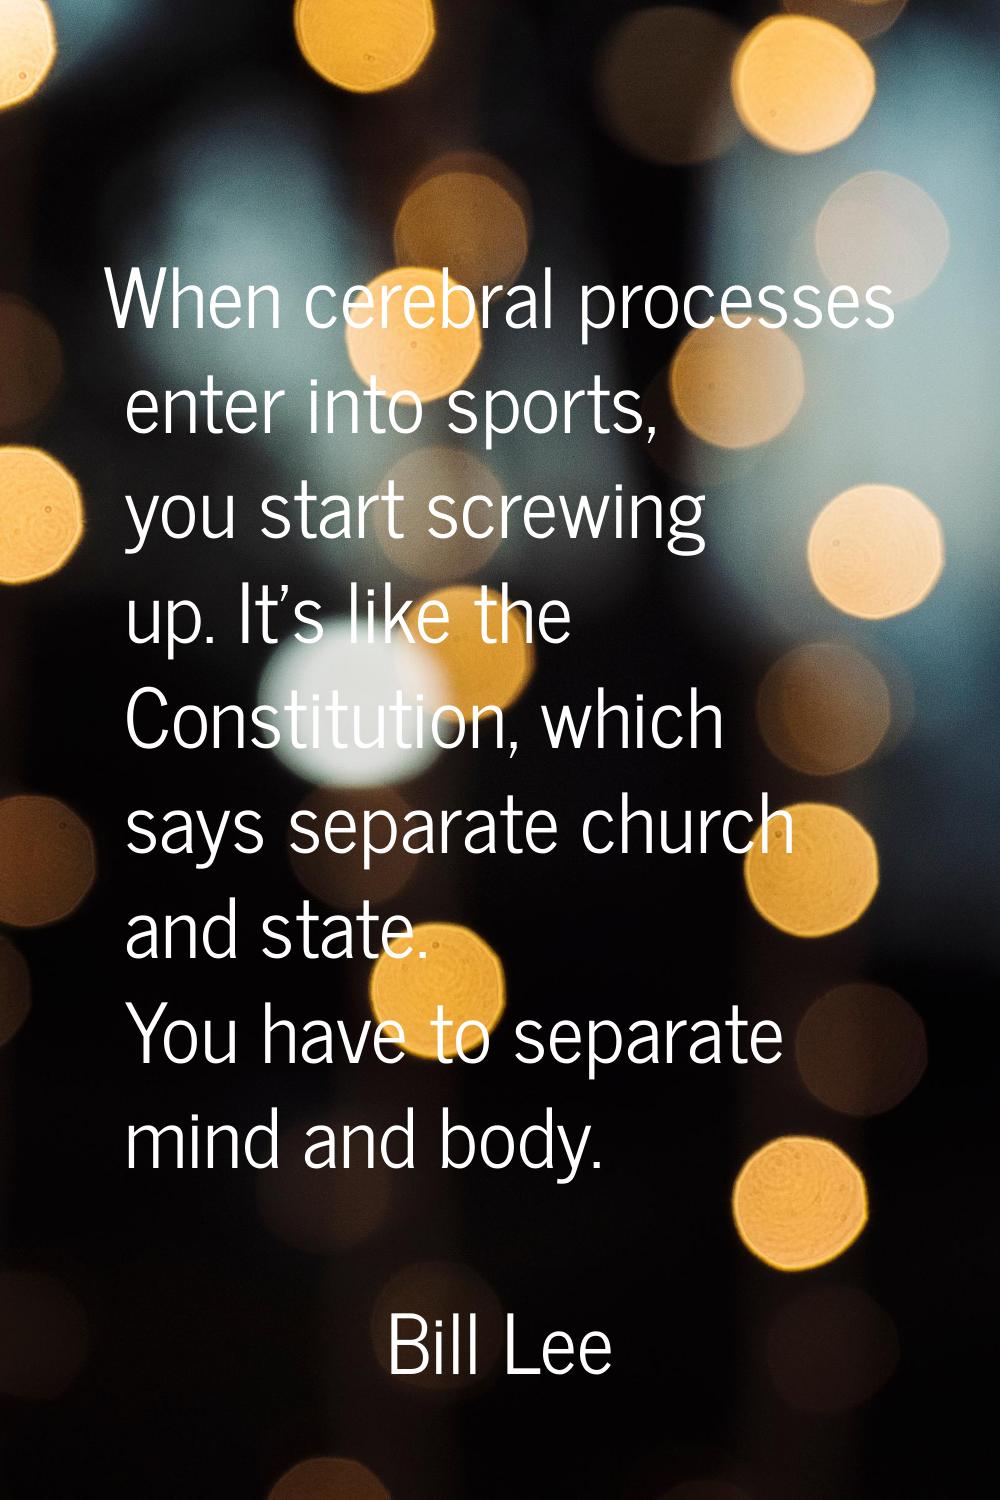 When cerebral processes enter into sports, you start screwing up. It's like the Constitution, which